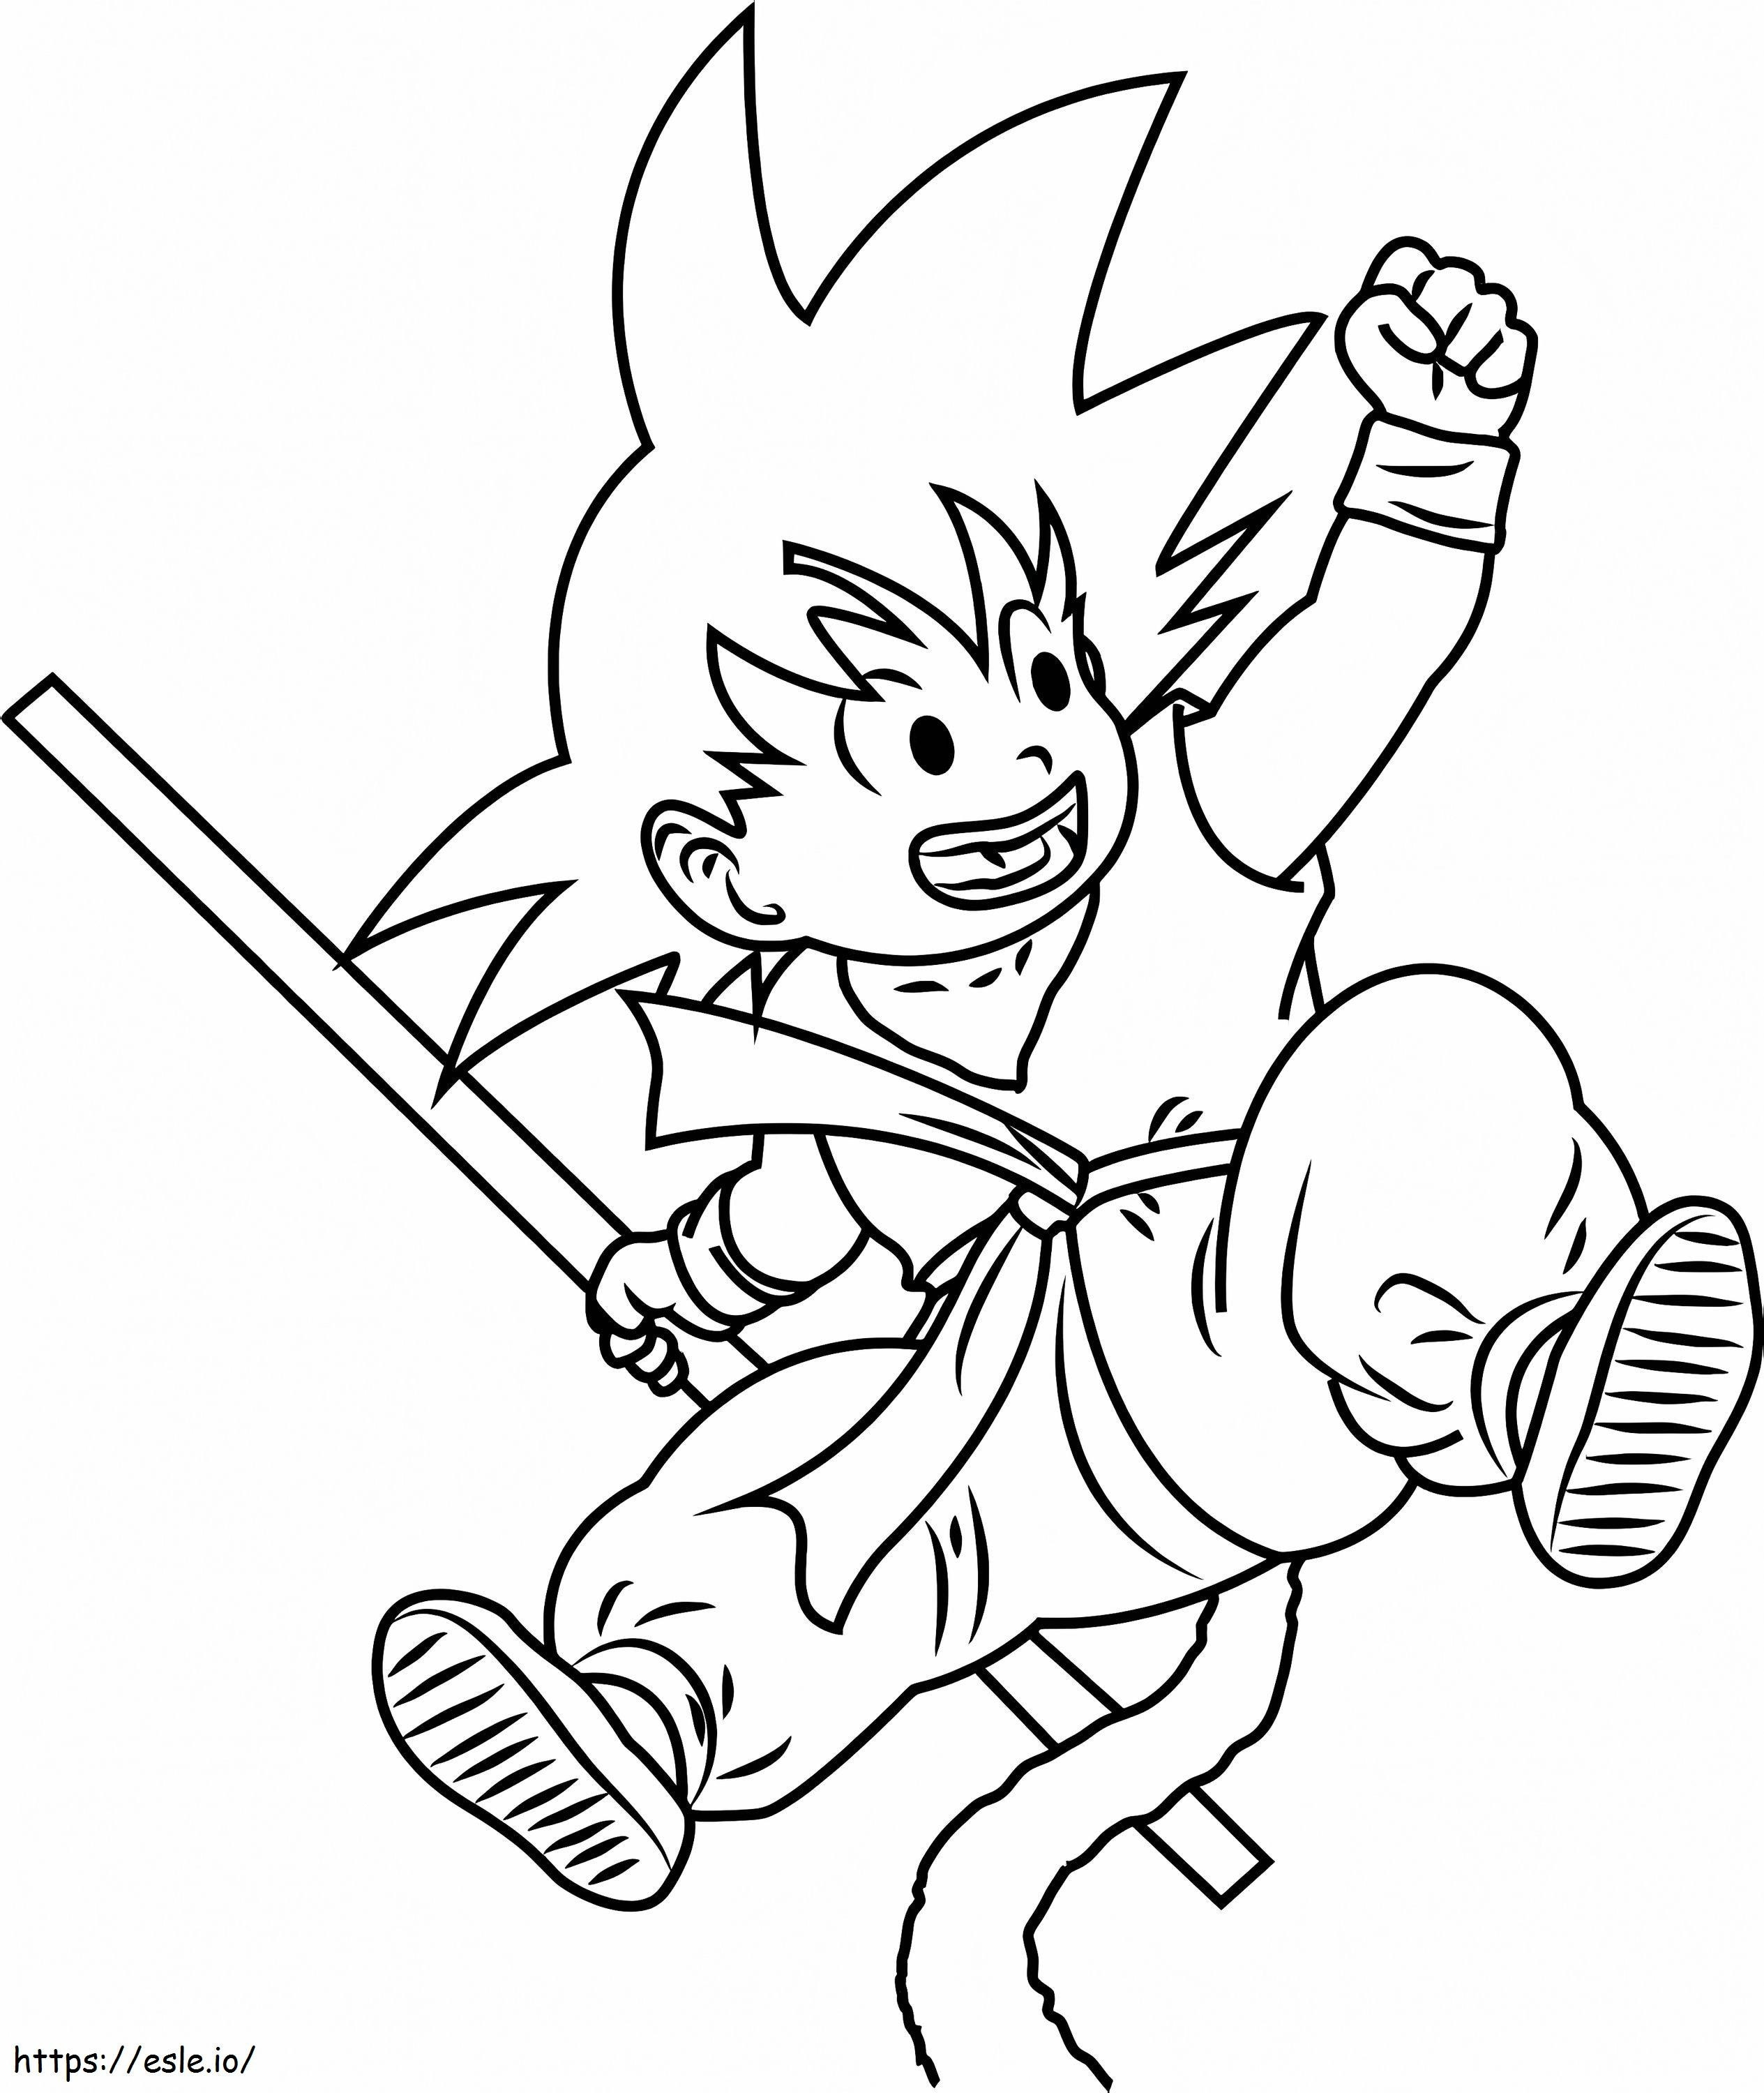 Jumping Little Goku coloring page